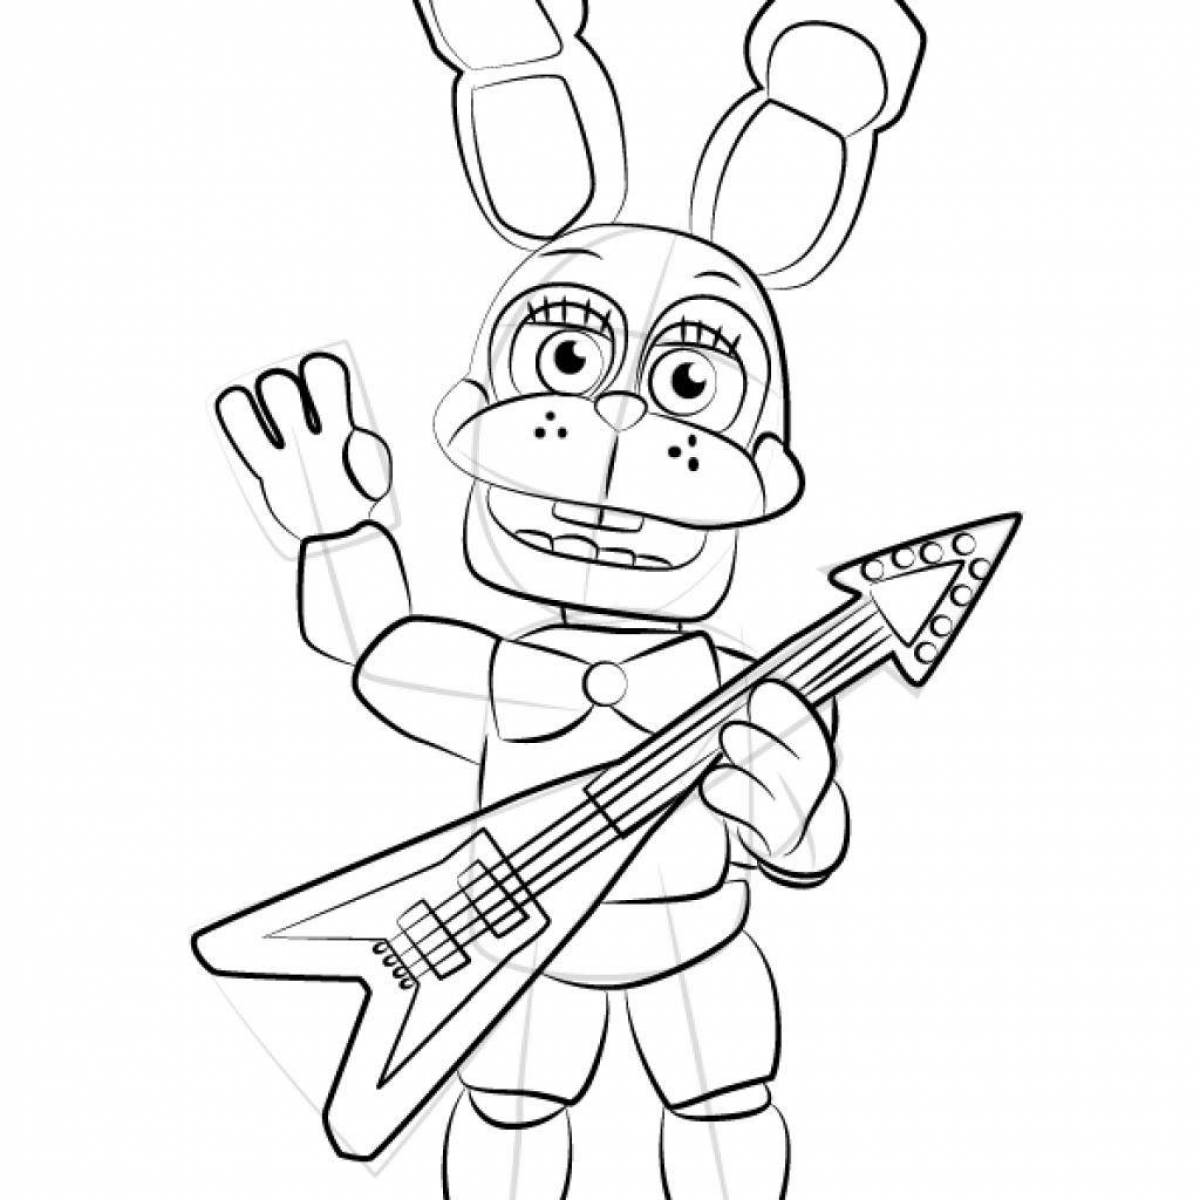 Bonnie's outstanding rock star coloring page